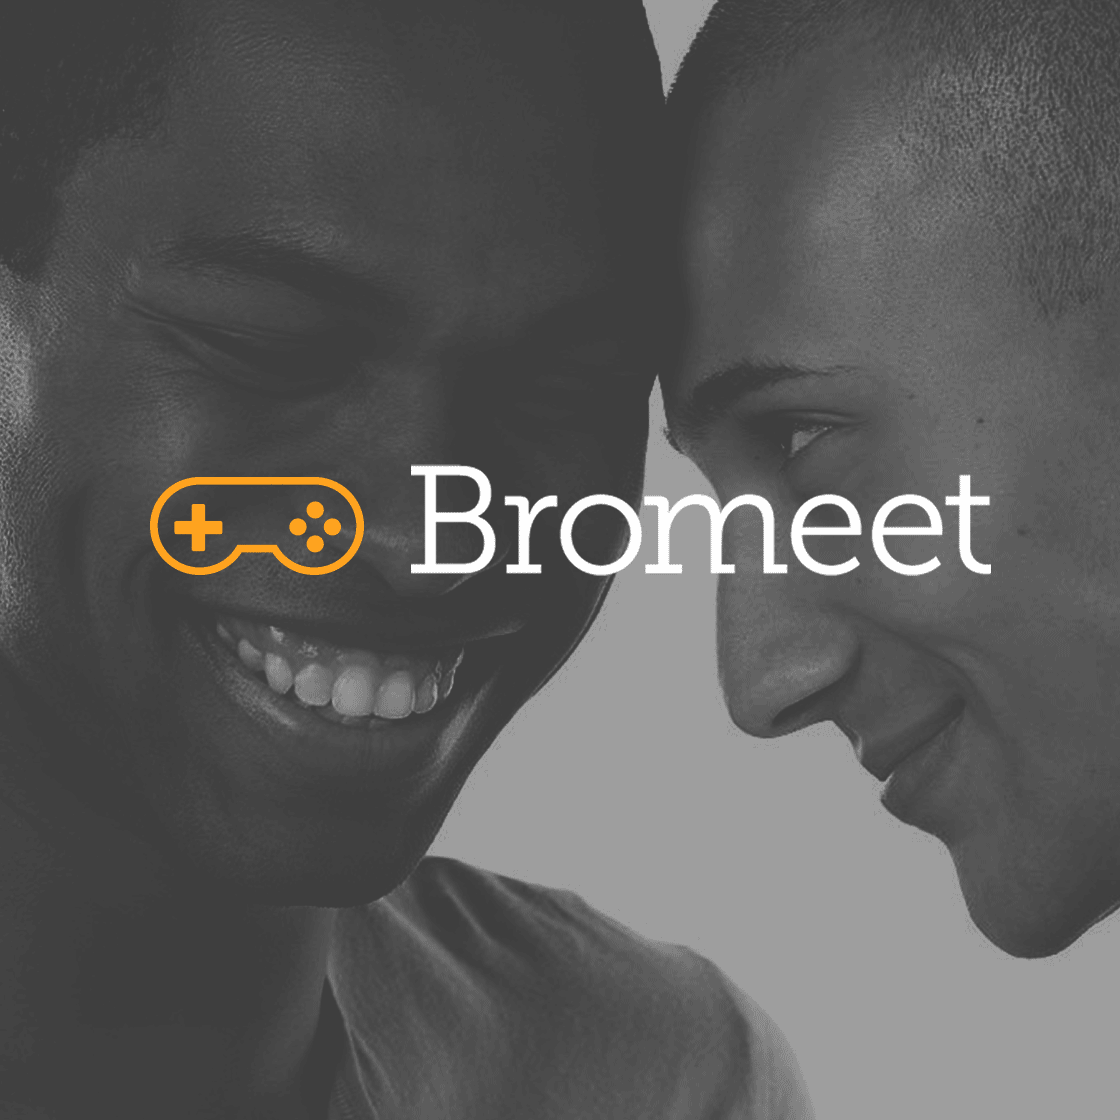 <strong>Mobile Application Design</strong>. Bromeet caters to the sapiosexual man seeking another based off similar, peculiar interests. Utilizing common interests and locations, Bromeet creates a radar of potential matches near and far. Users can send messages and share photos with other members. Profile photo uploads, privacy settings, and extensive radar filters offer a tailored experience for any lifestyle.